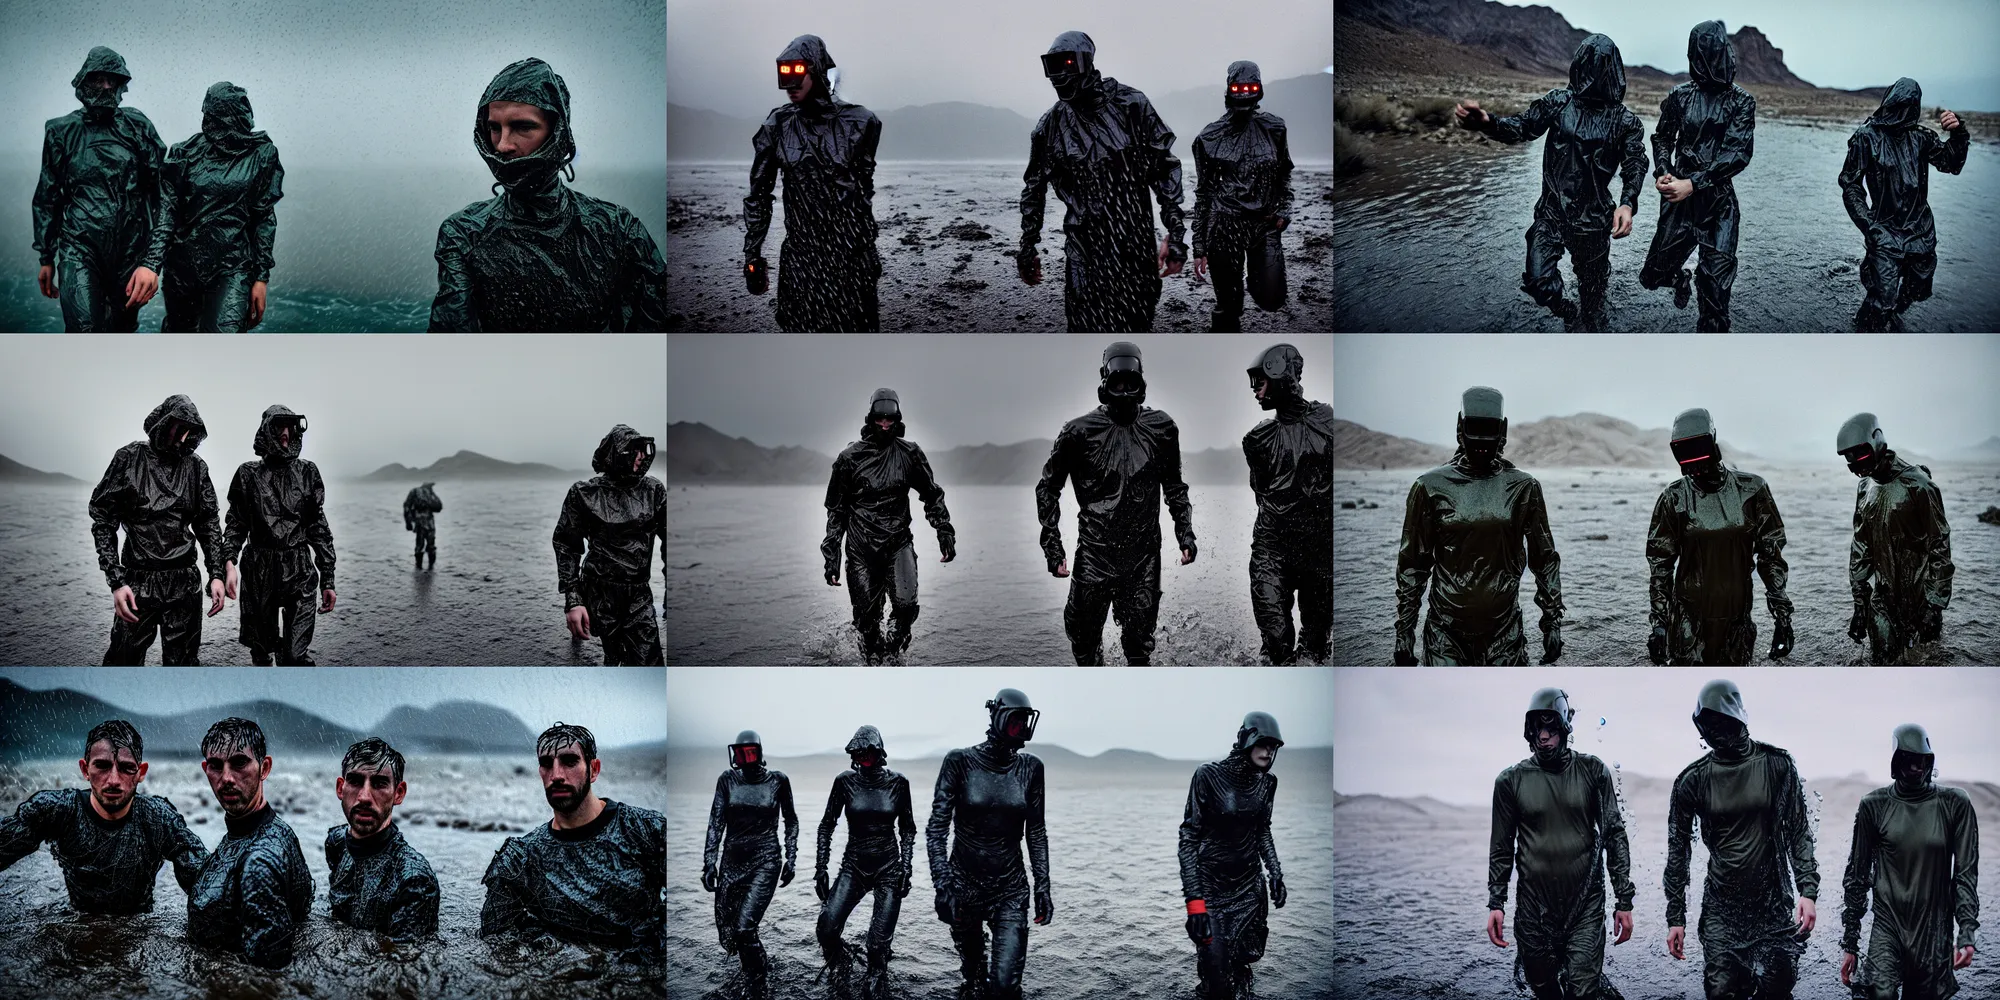 Prompt: cinestill hasselblad 2 0 0 mm, f 1. 2, extreme motion blur, candid photographic portrait by robert capas of 2 cyborgs wearing rugged camouflage mesh techwear in treacherous waters, mojave desert, modern cyberpunk moody depressing cinematic, pouring rain, ultra realistic faces, ex machina